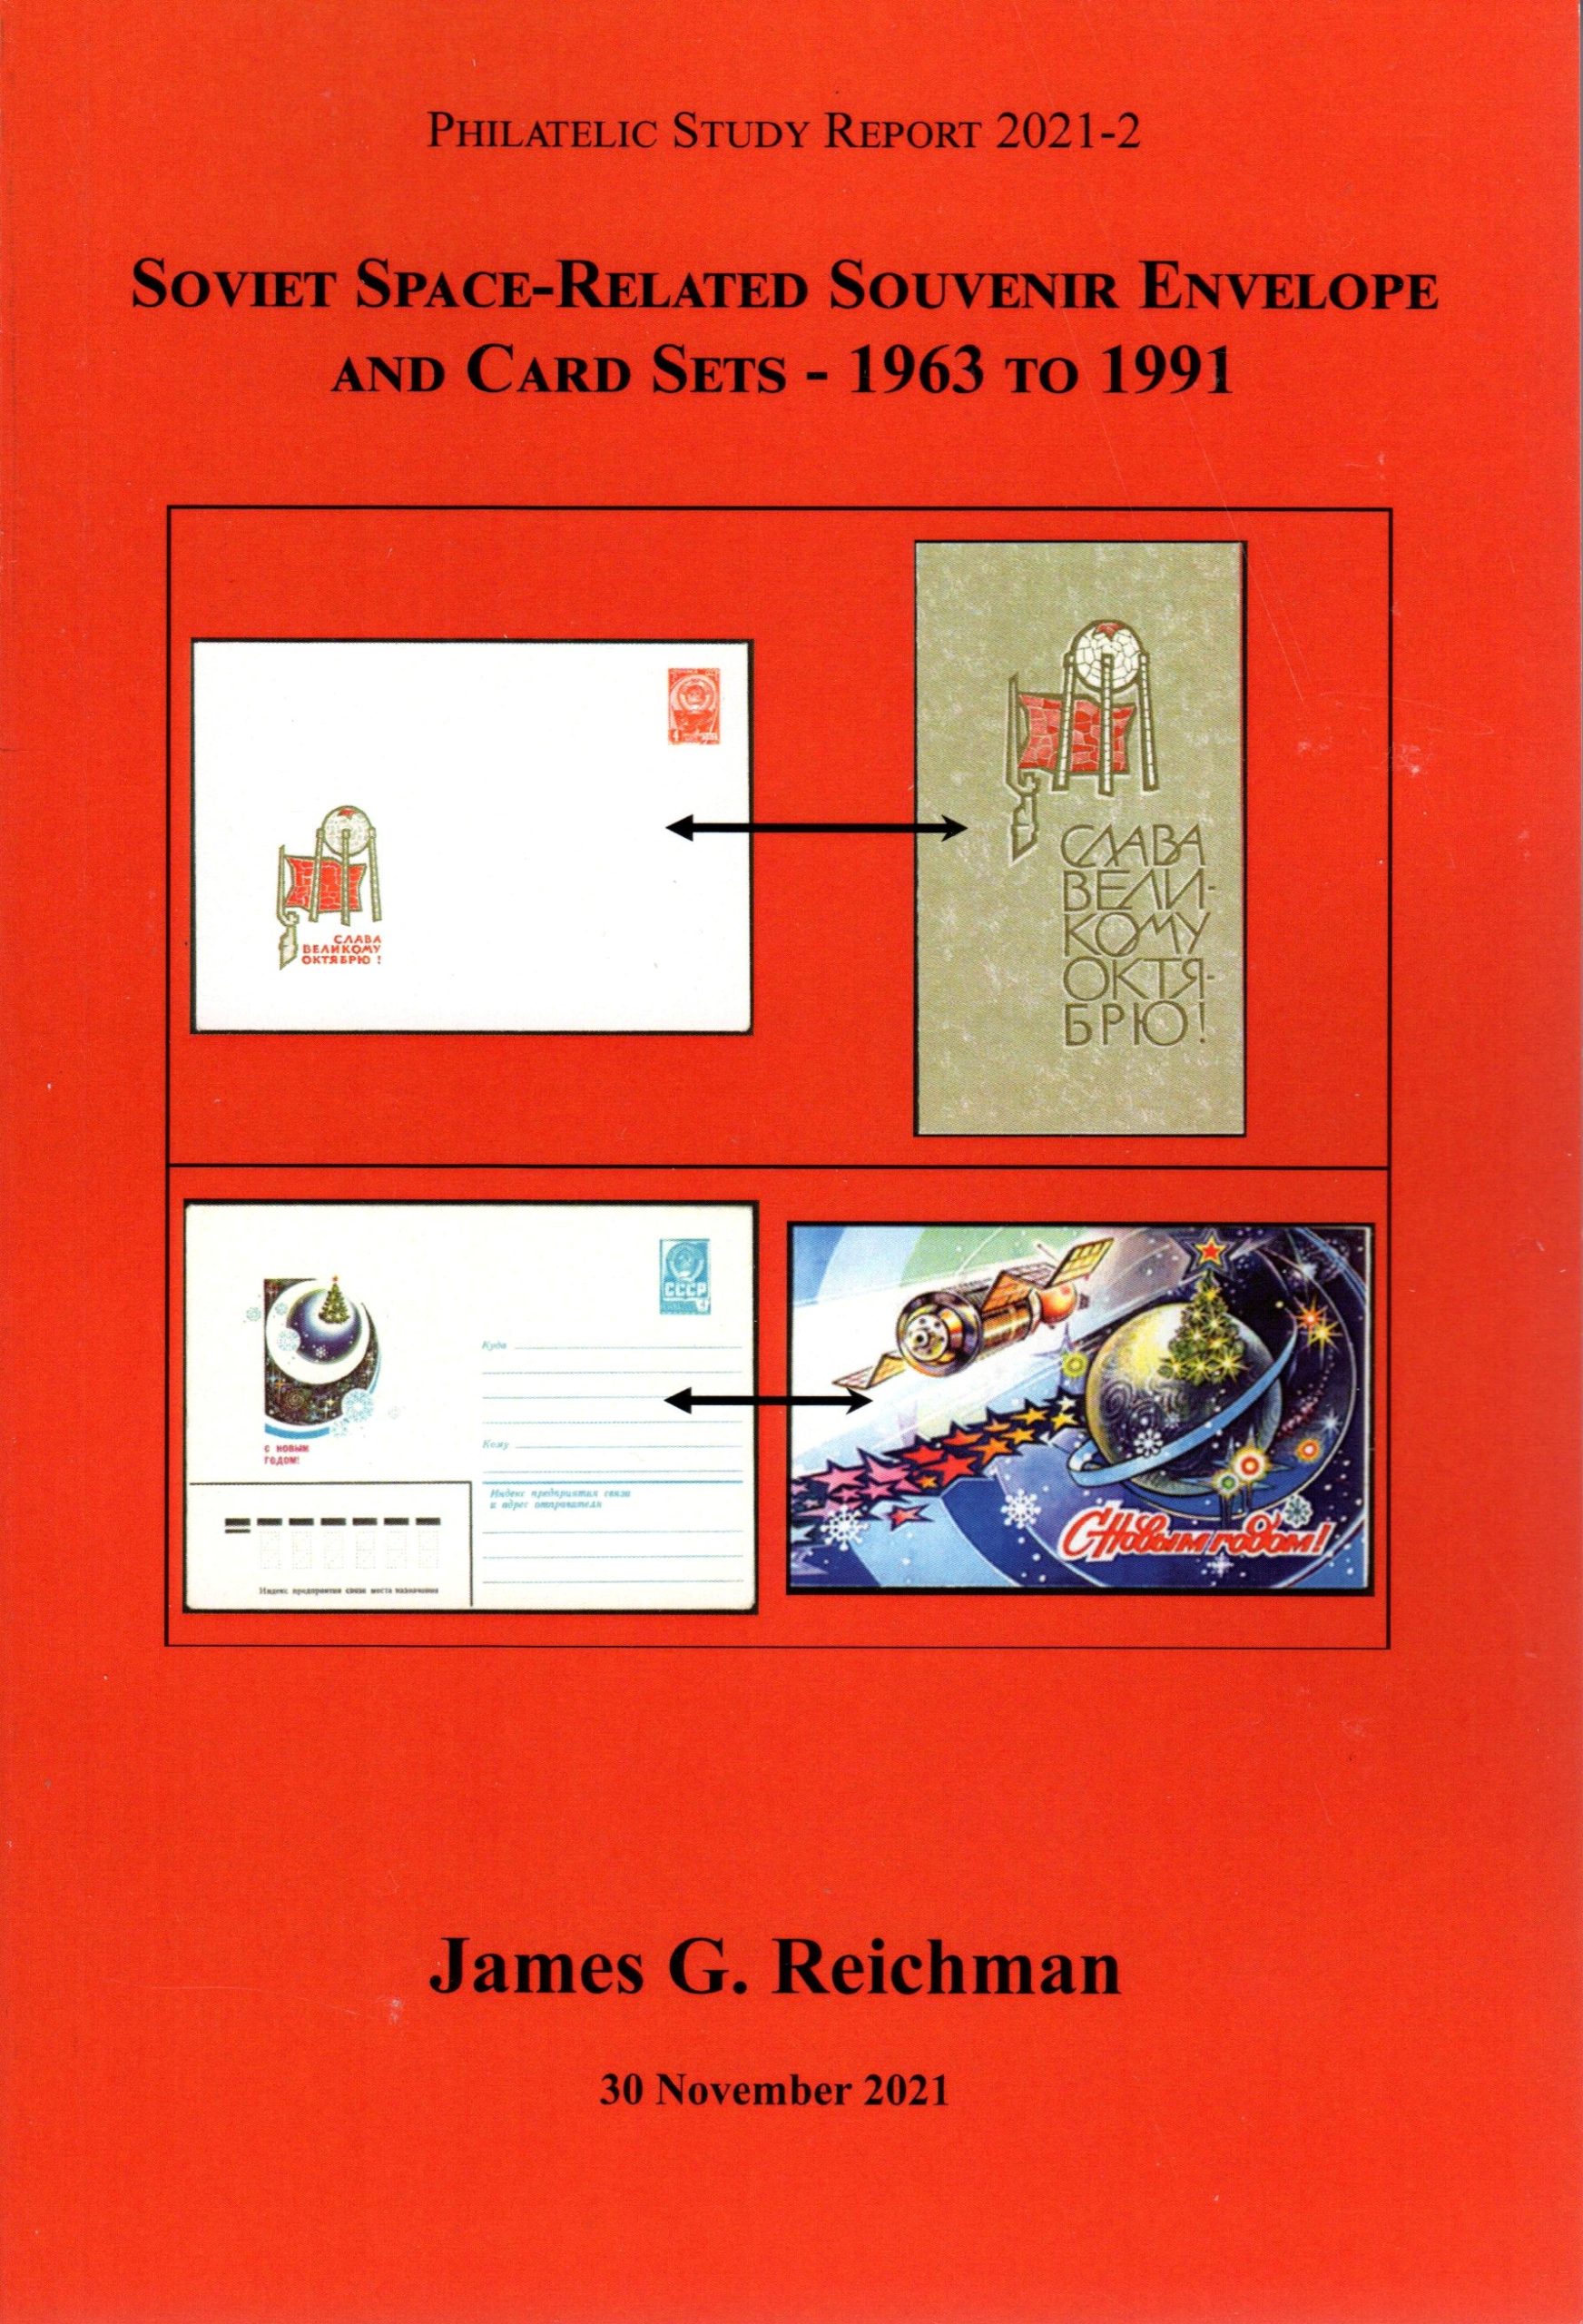 Soviet Space-Related Souvenir Envelope and Card Sets - 1963 to 1991(345 pgs) CD-ROM included